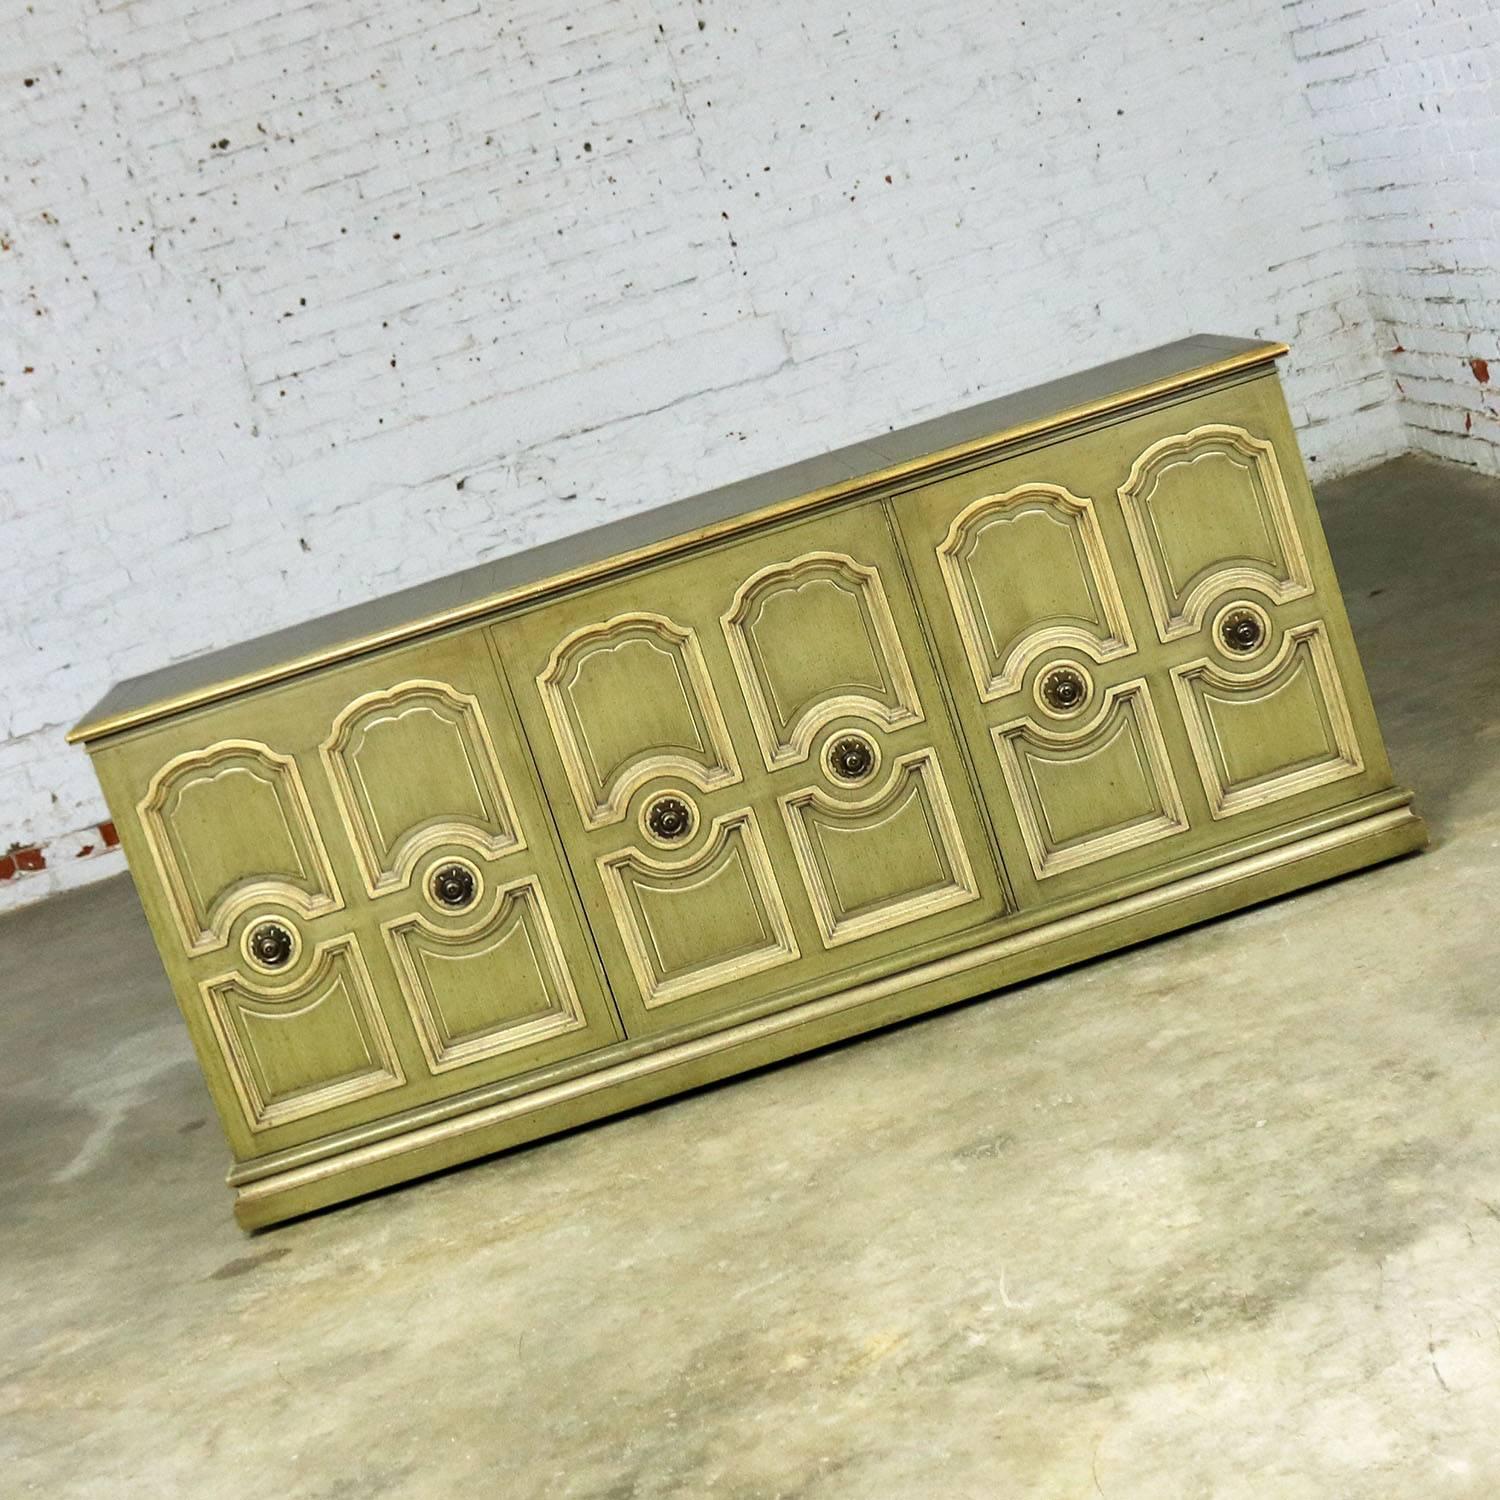 Fabulous all original Henredon green and ivory lacquer Hollywood Regency credenza or buffet cabinet in the style of Dorothy Draper. In wonderful all original vintage condition, circa 1960s.

Now enter the Duchess of design and the inventor of